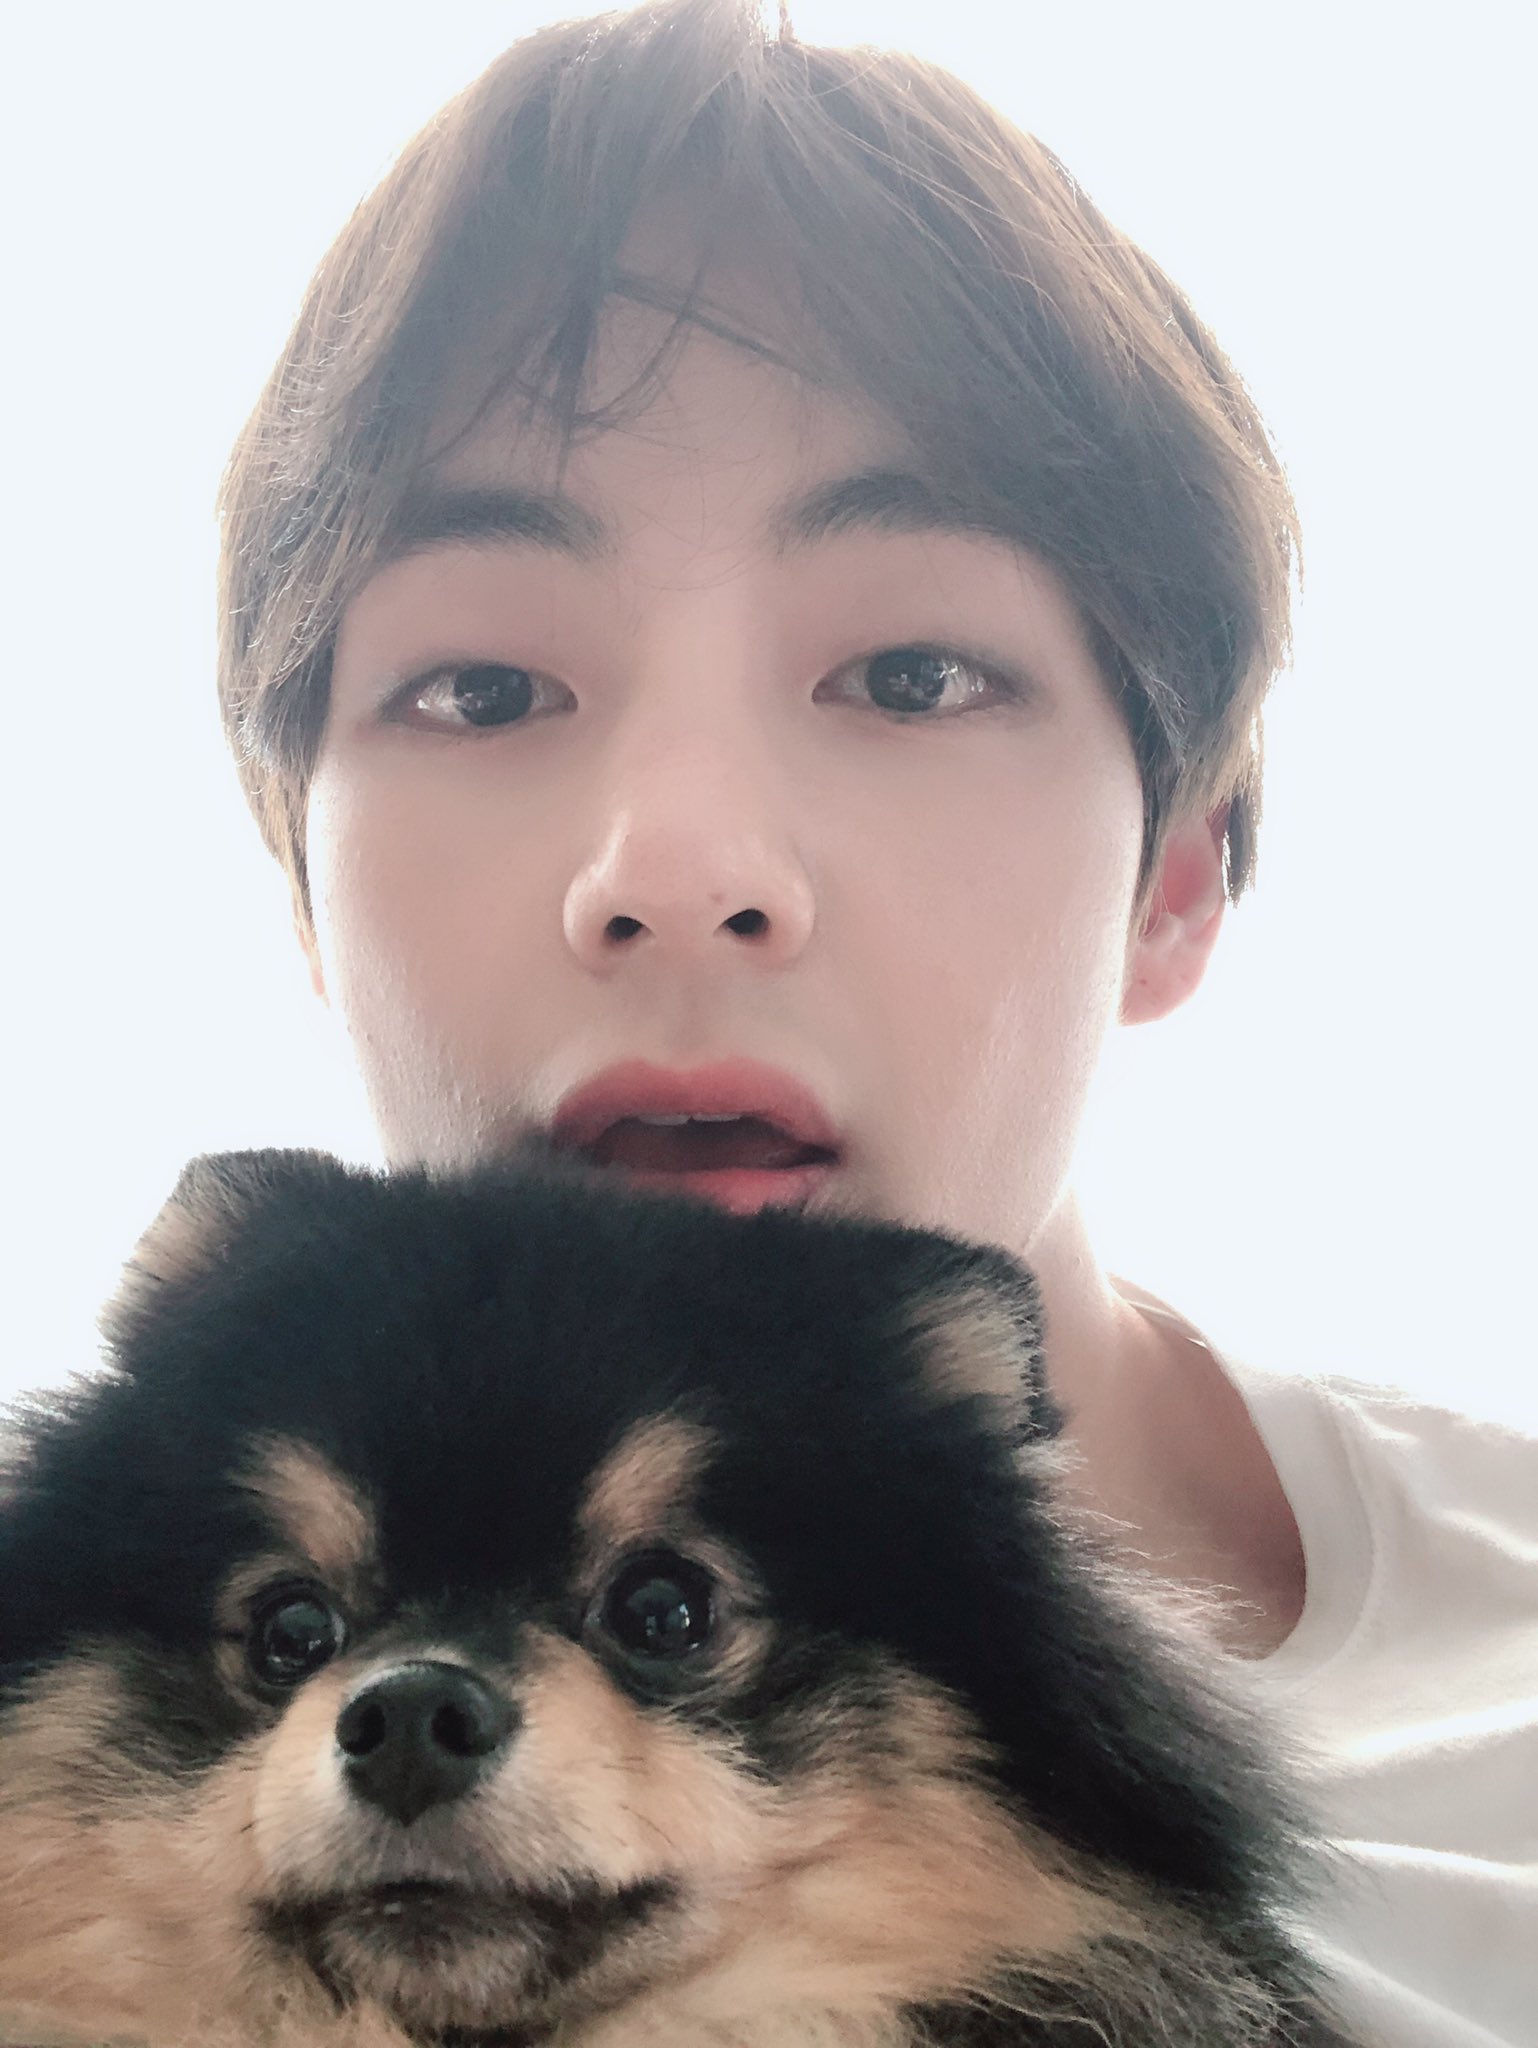 BTS' V and Yeontan